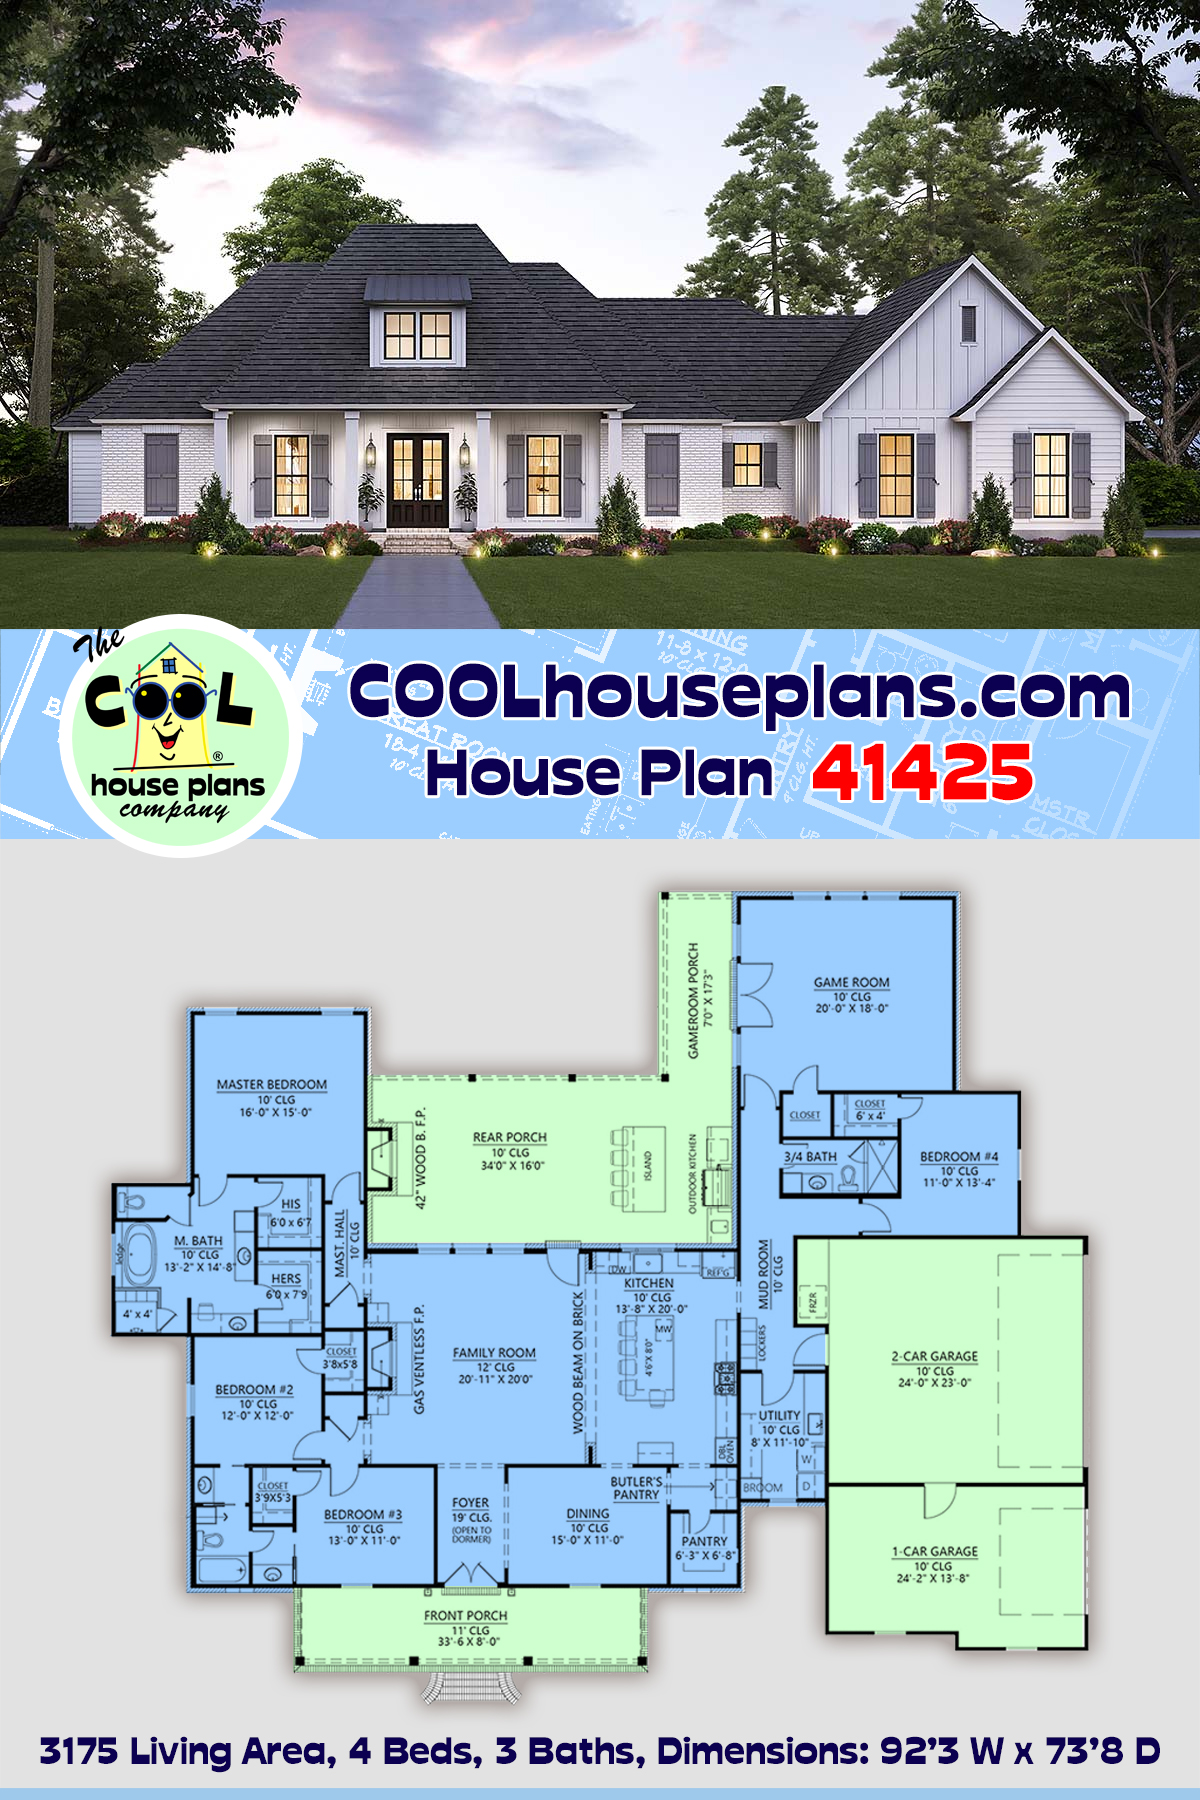 French Country House Plan 41425 with 4 Beds, 3 Baths, 3 Car Garage